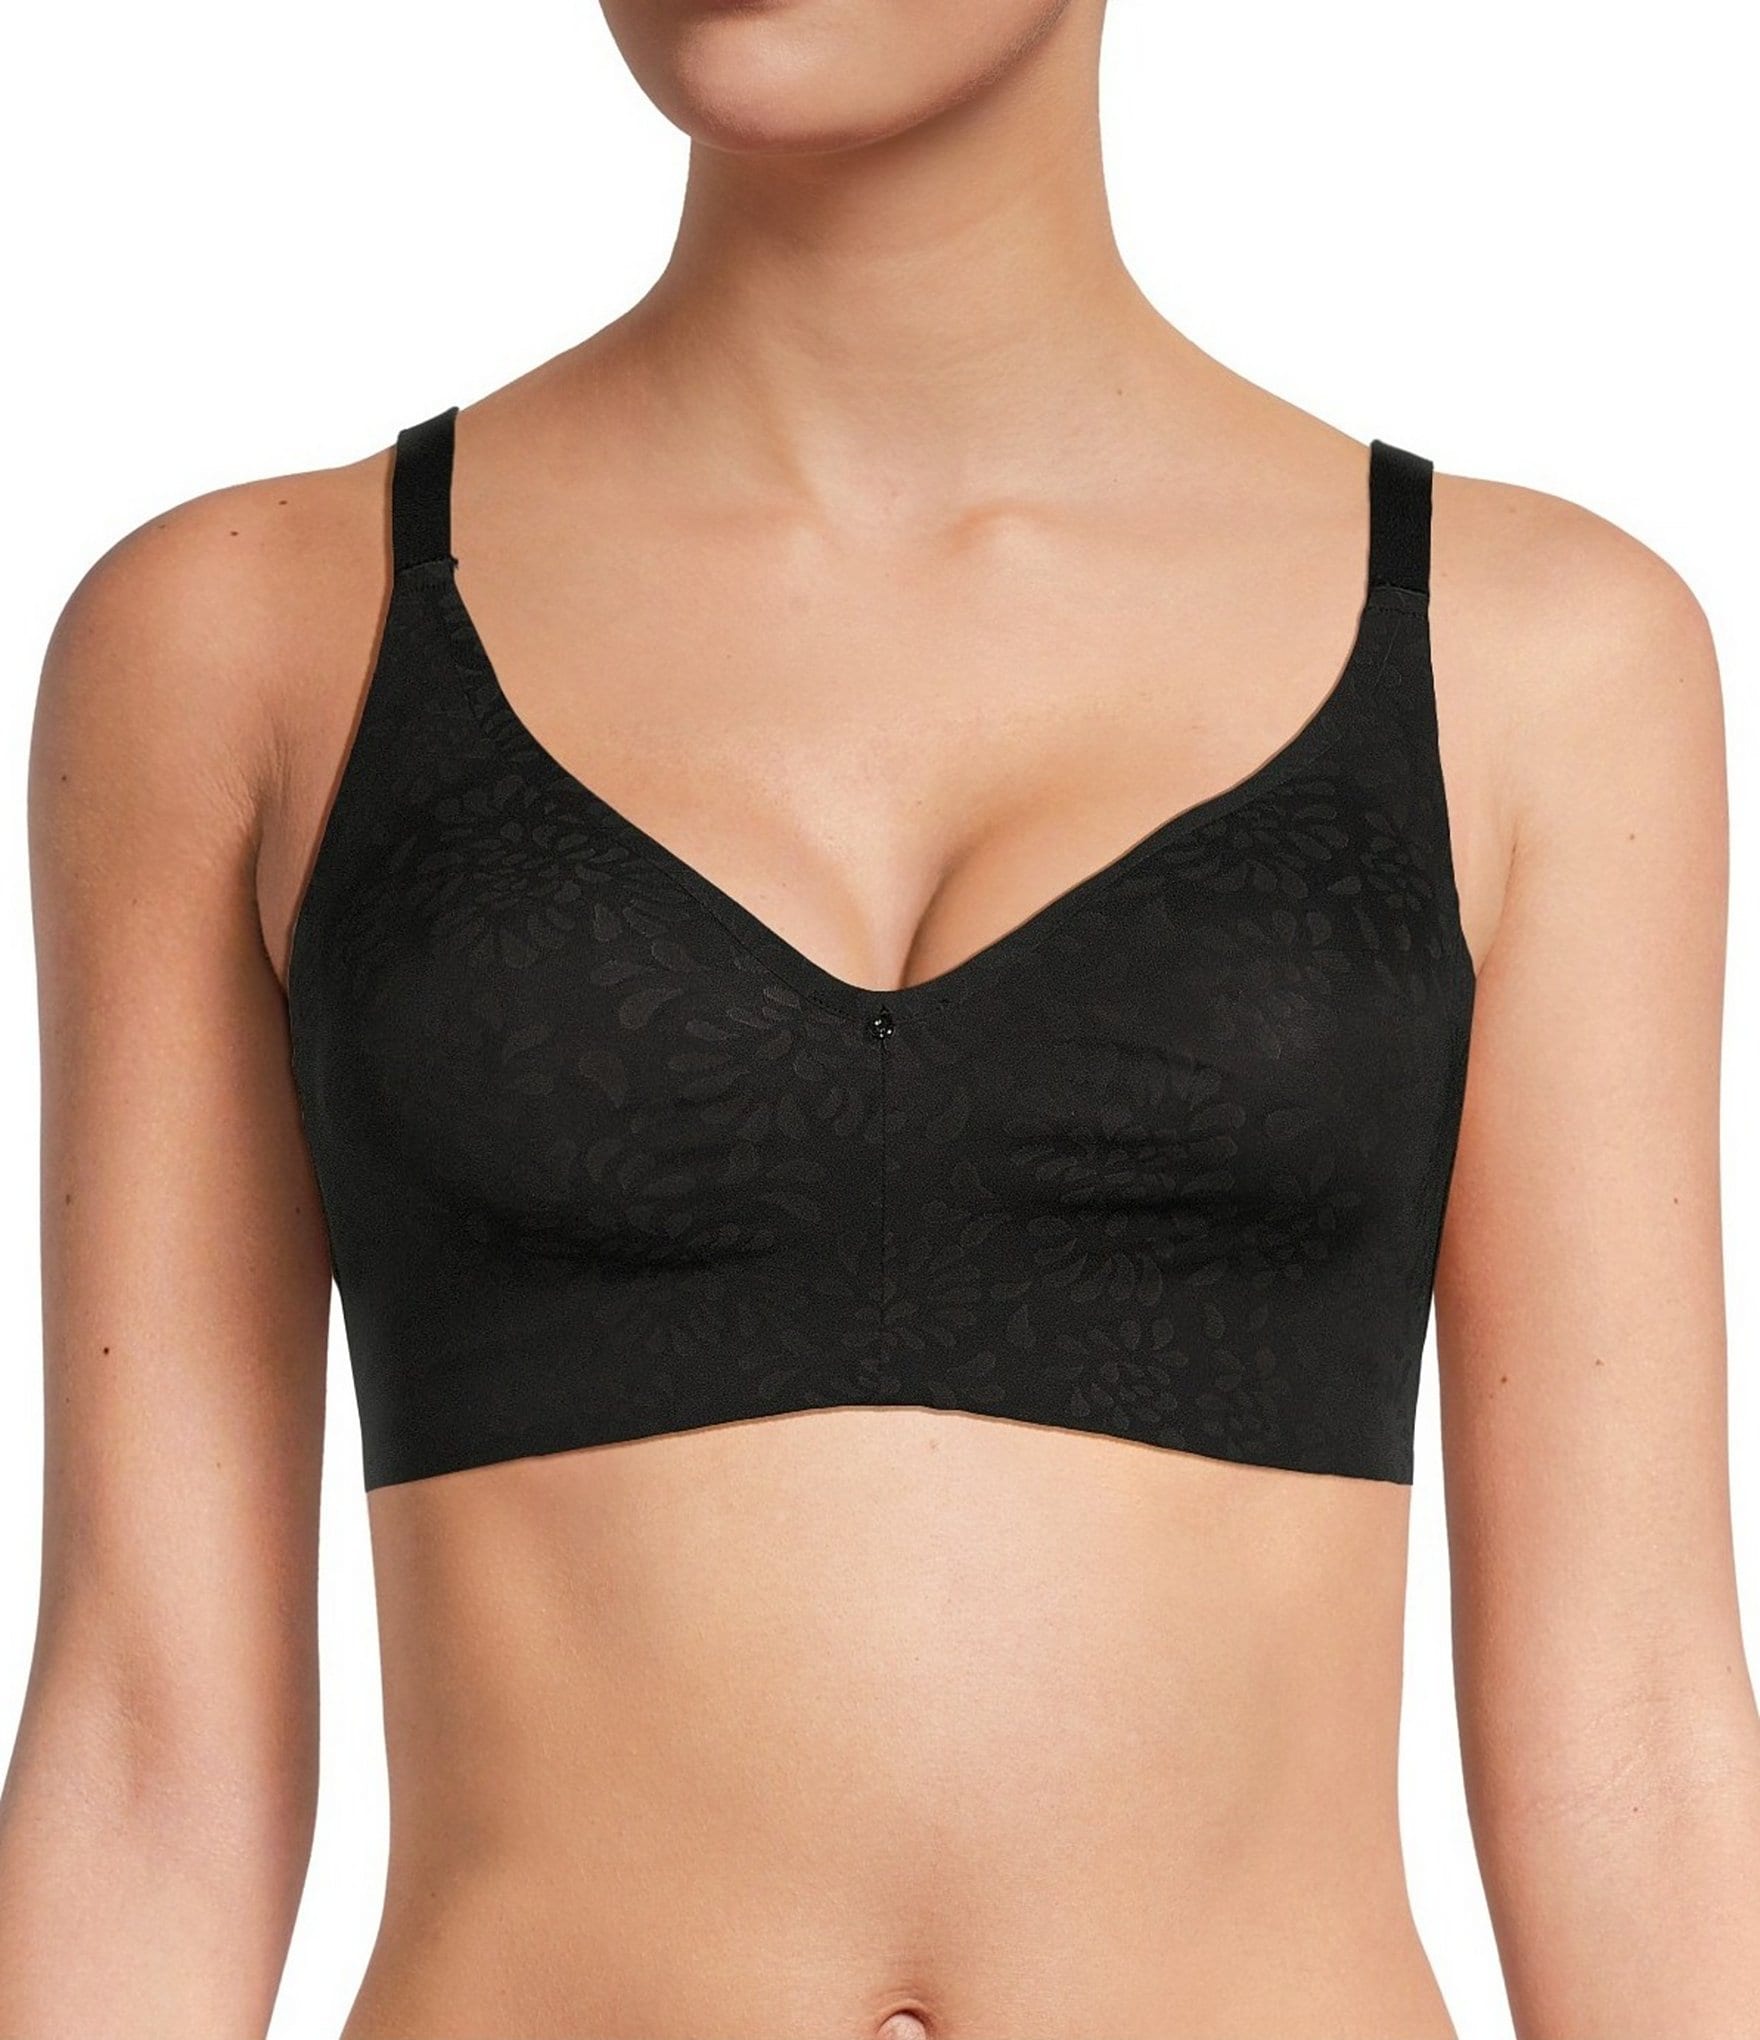 Comfortable Stylish back support bra Deals 